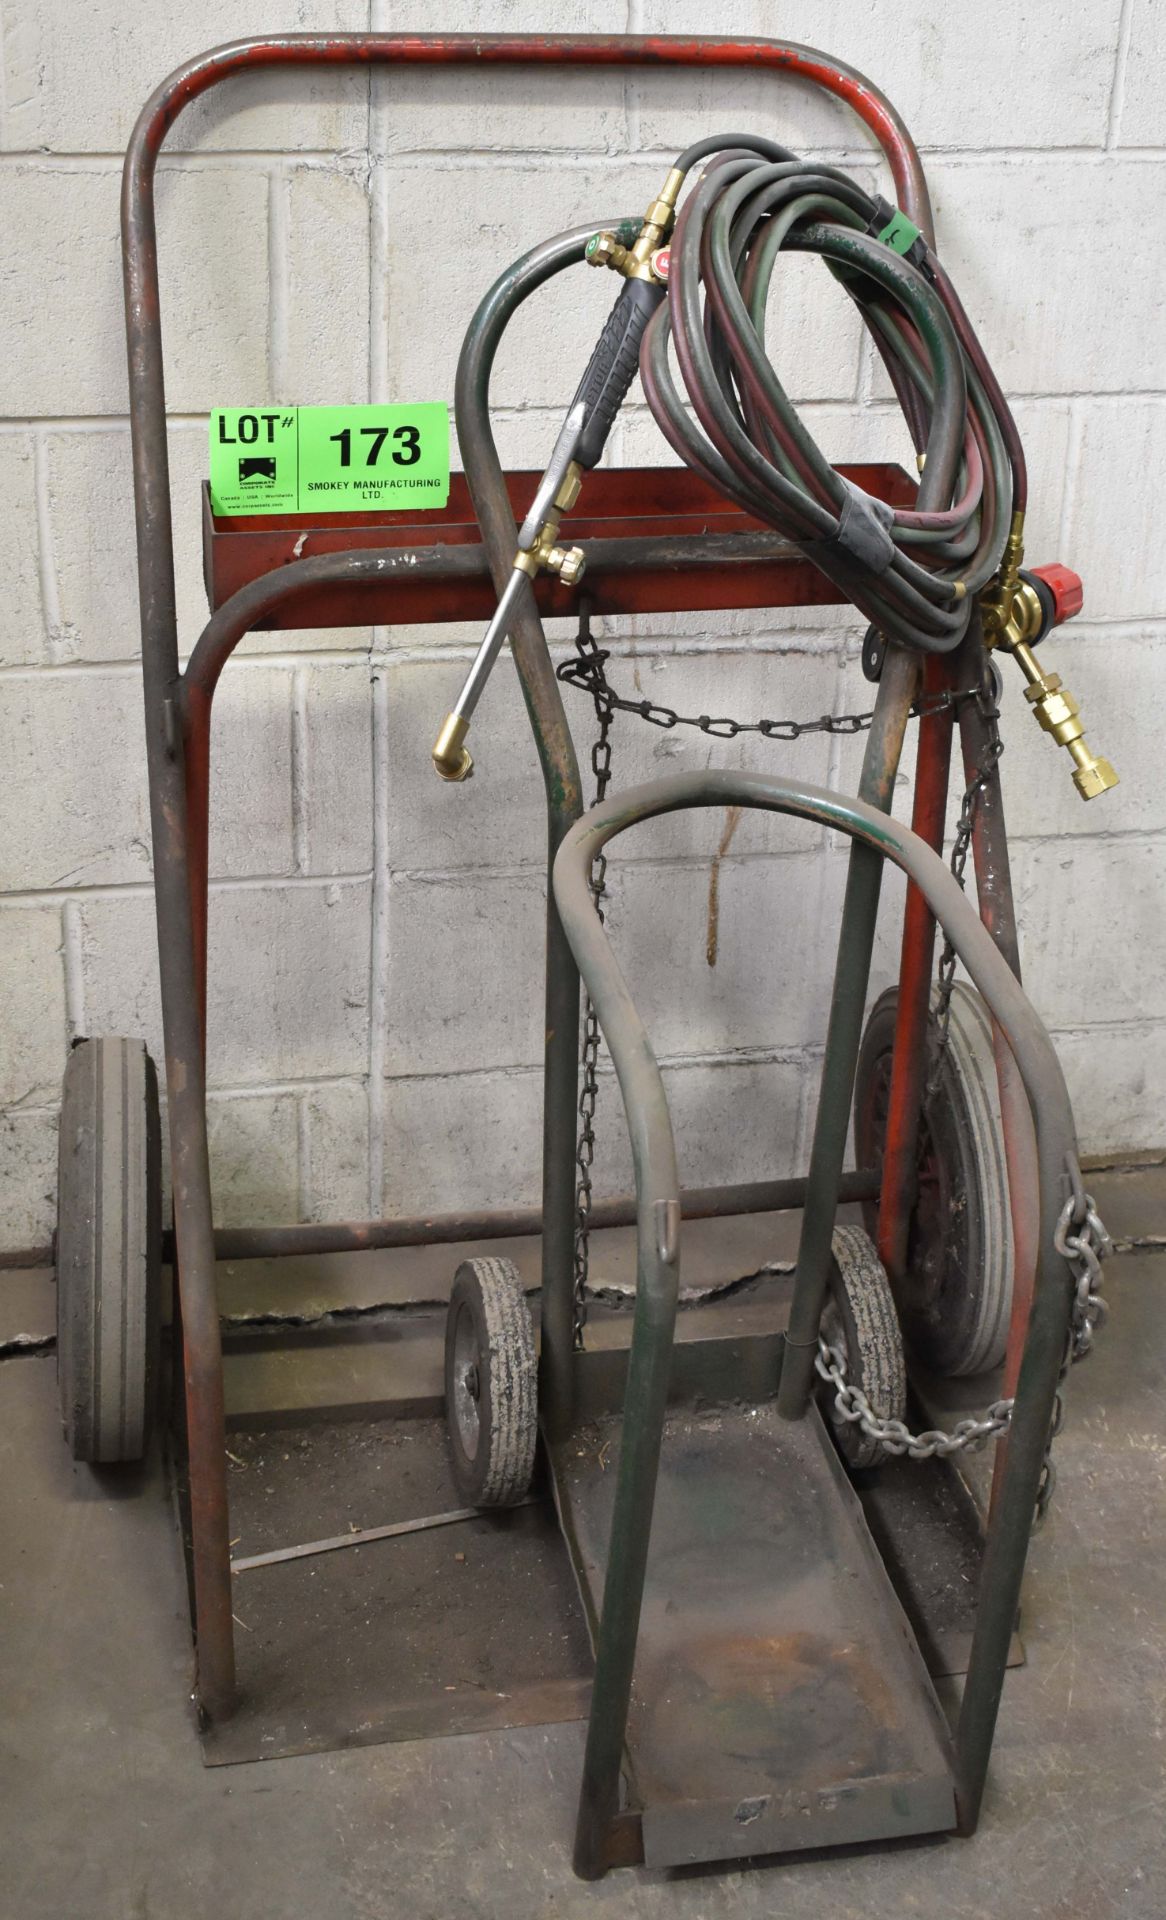 LOT/ OXY-ACETYLENE TANK CADDIES WITH TORCH, GAUGES AND HOSE